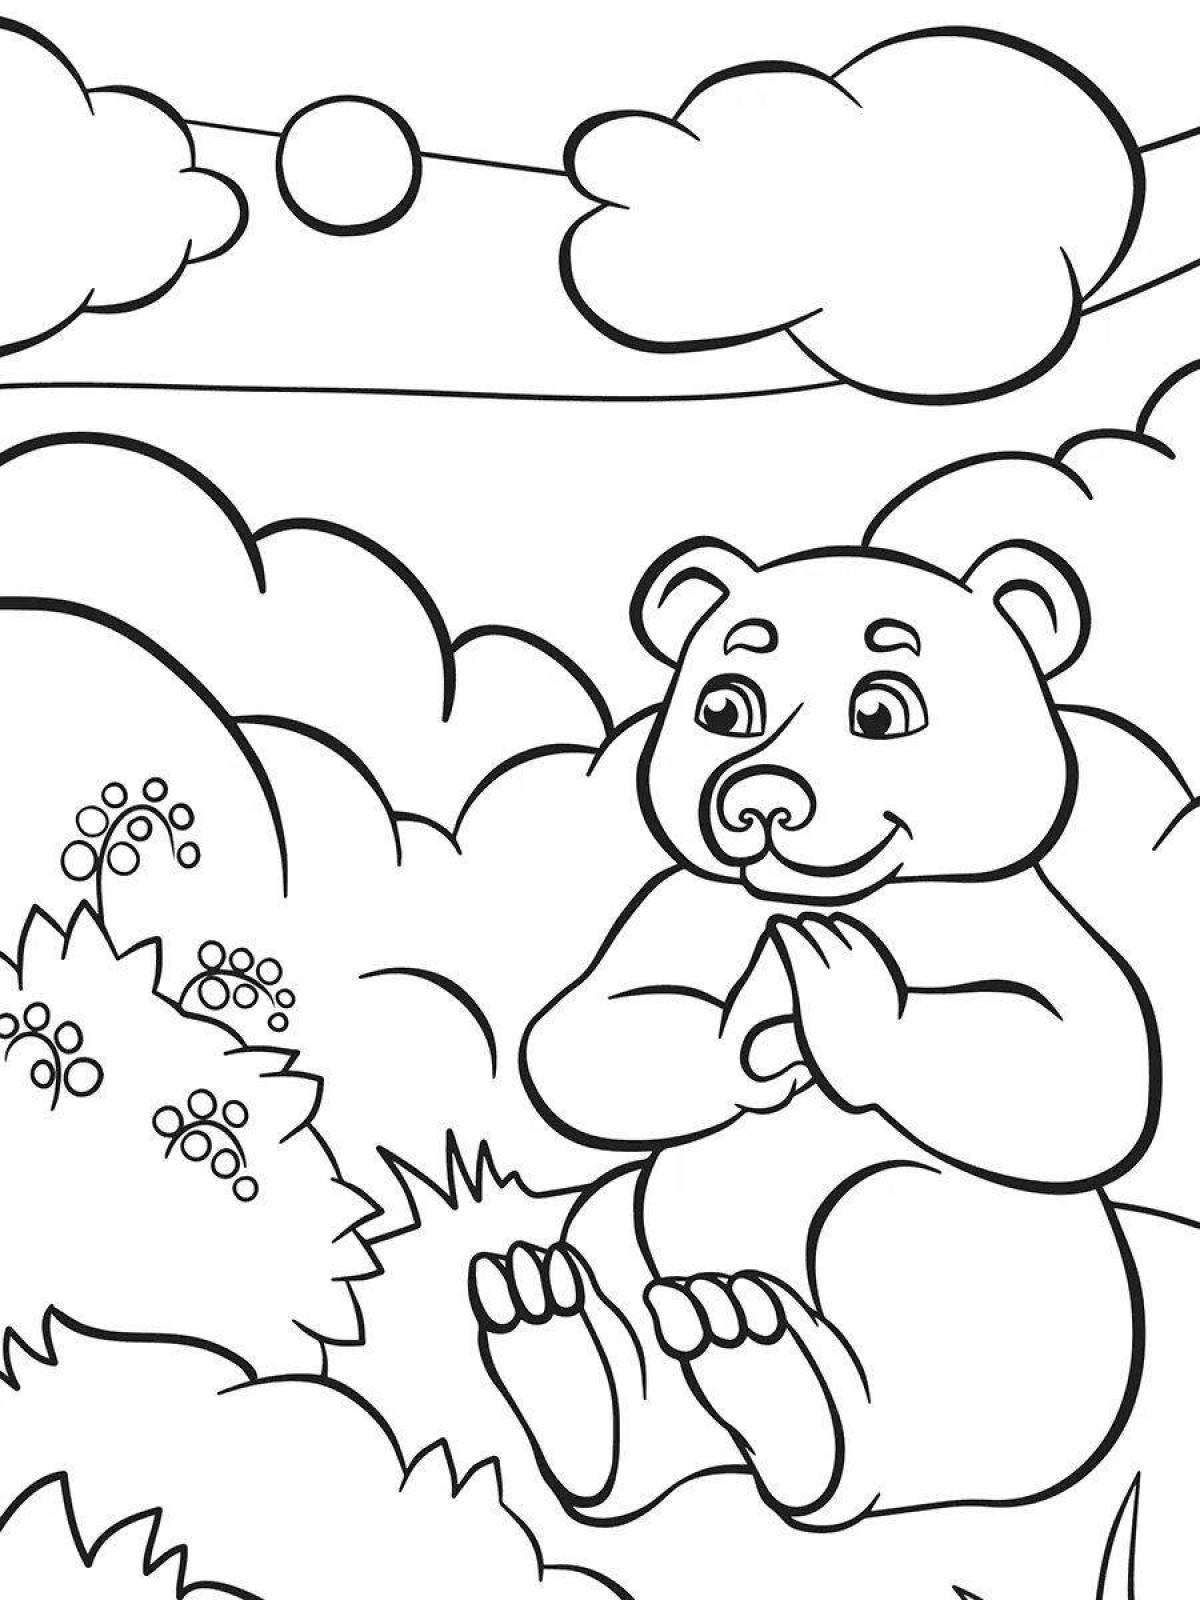 Coloring book playful bear in the forest